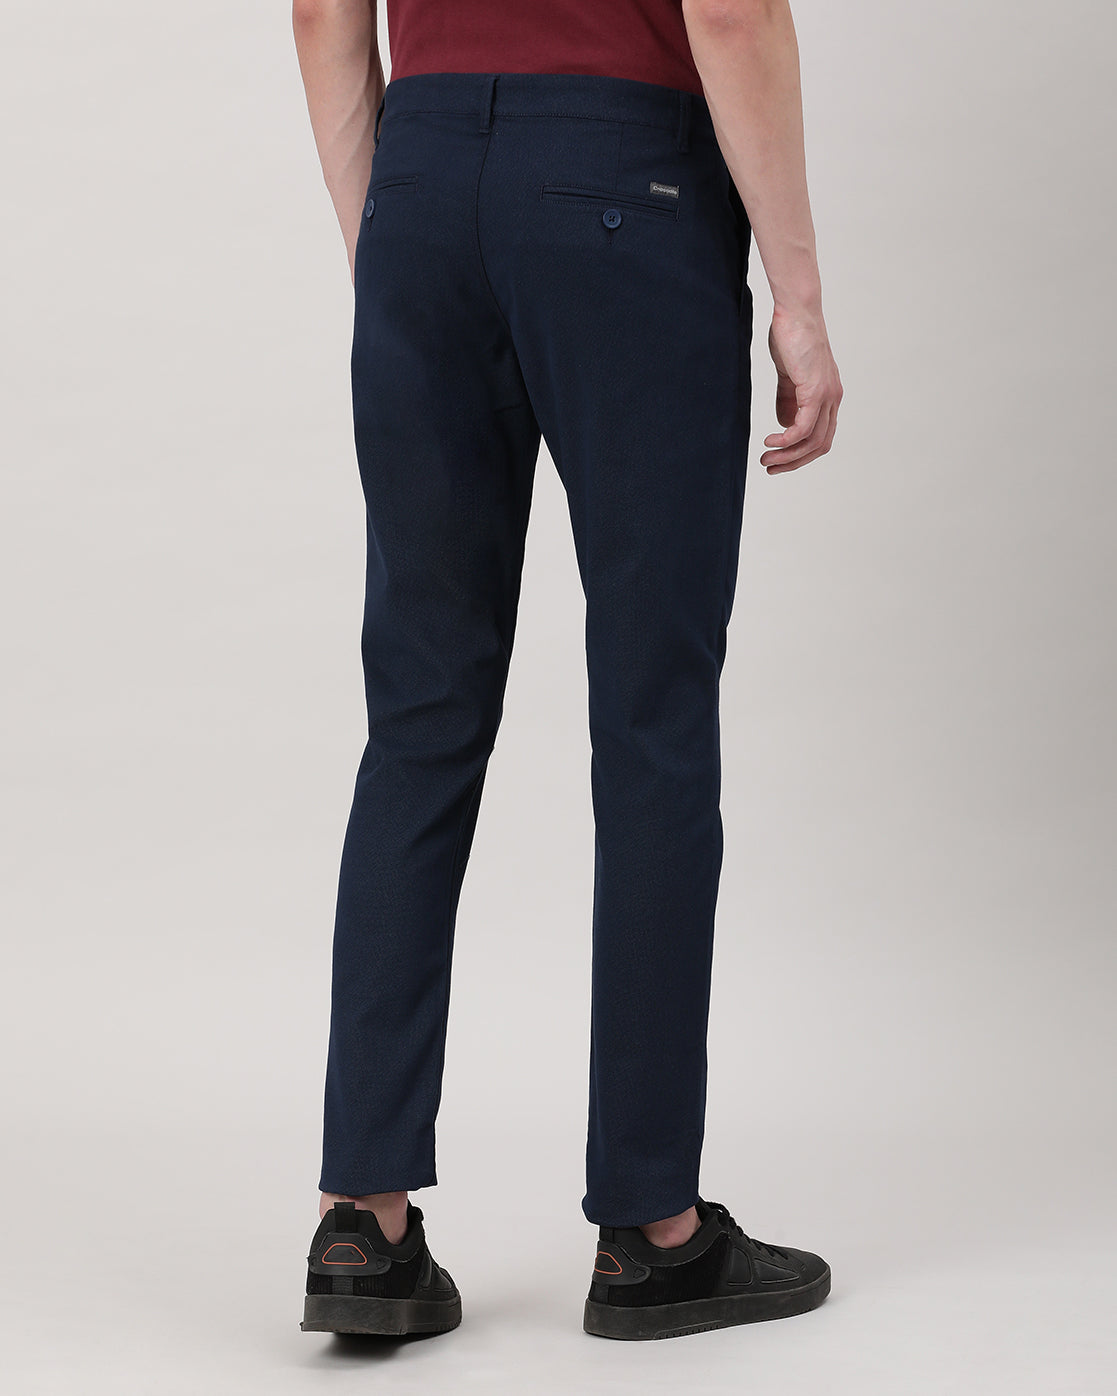 Casual Trim Fit Printed Navy Trousers for Men